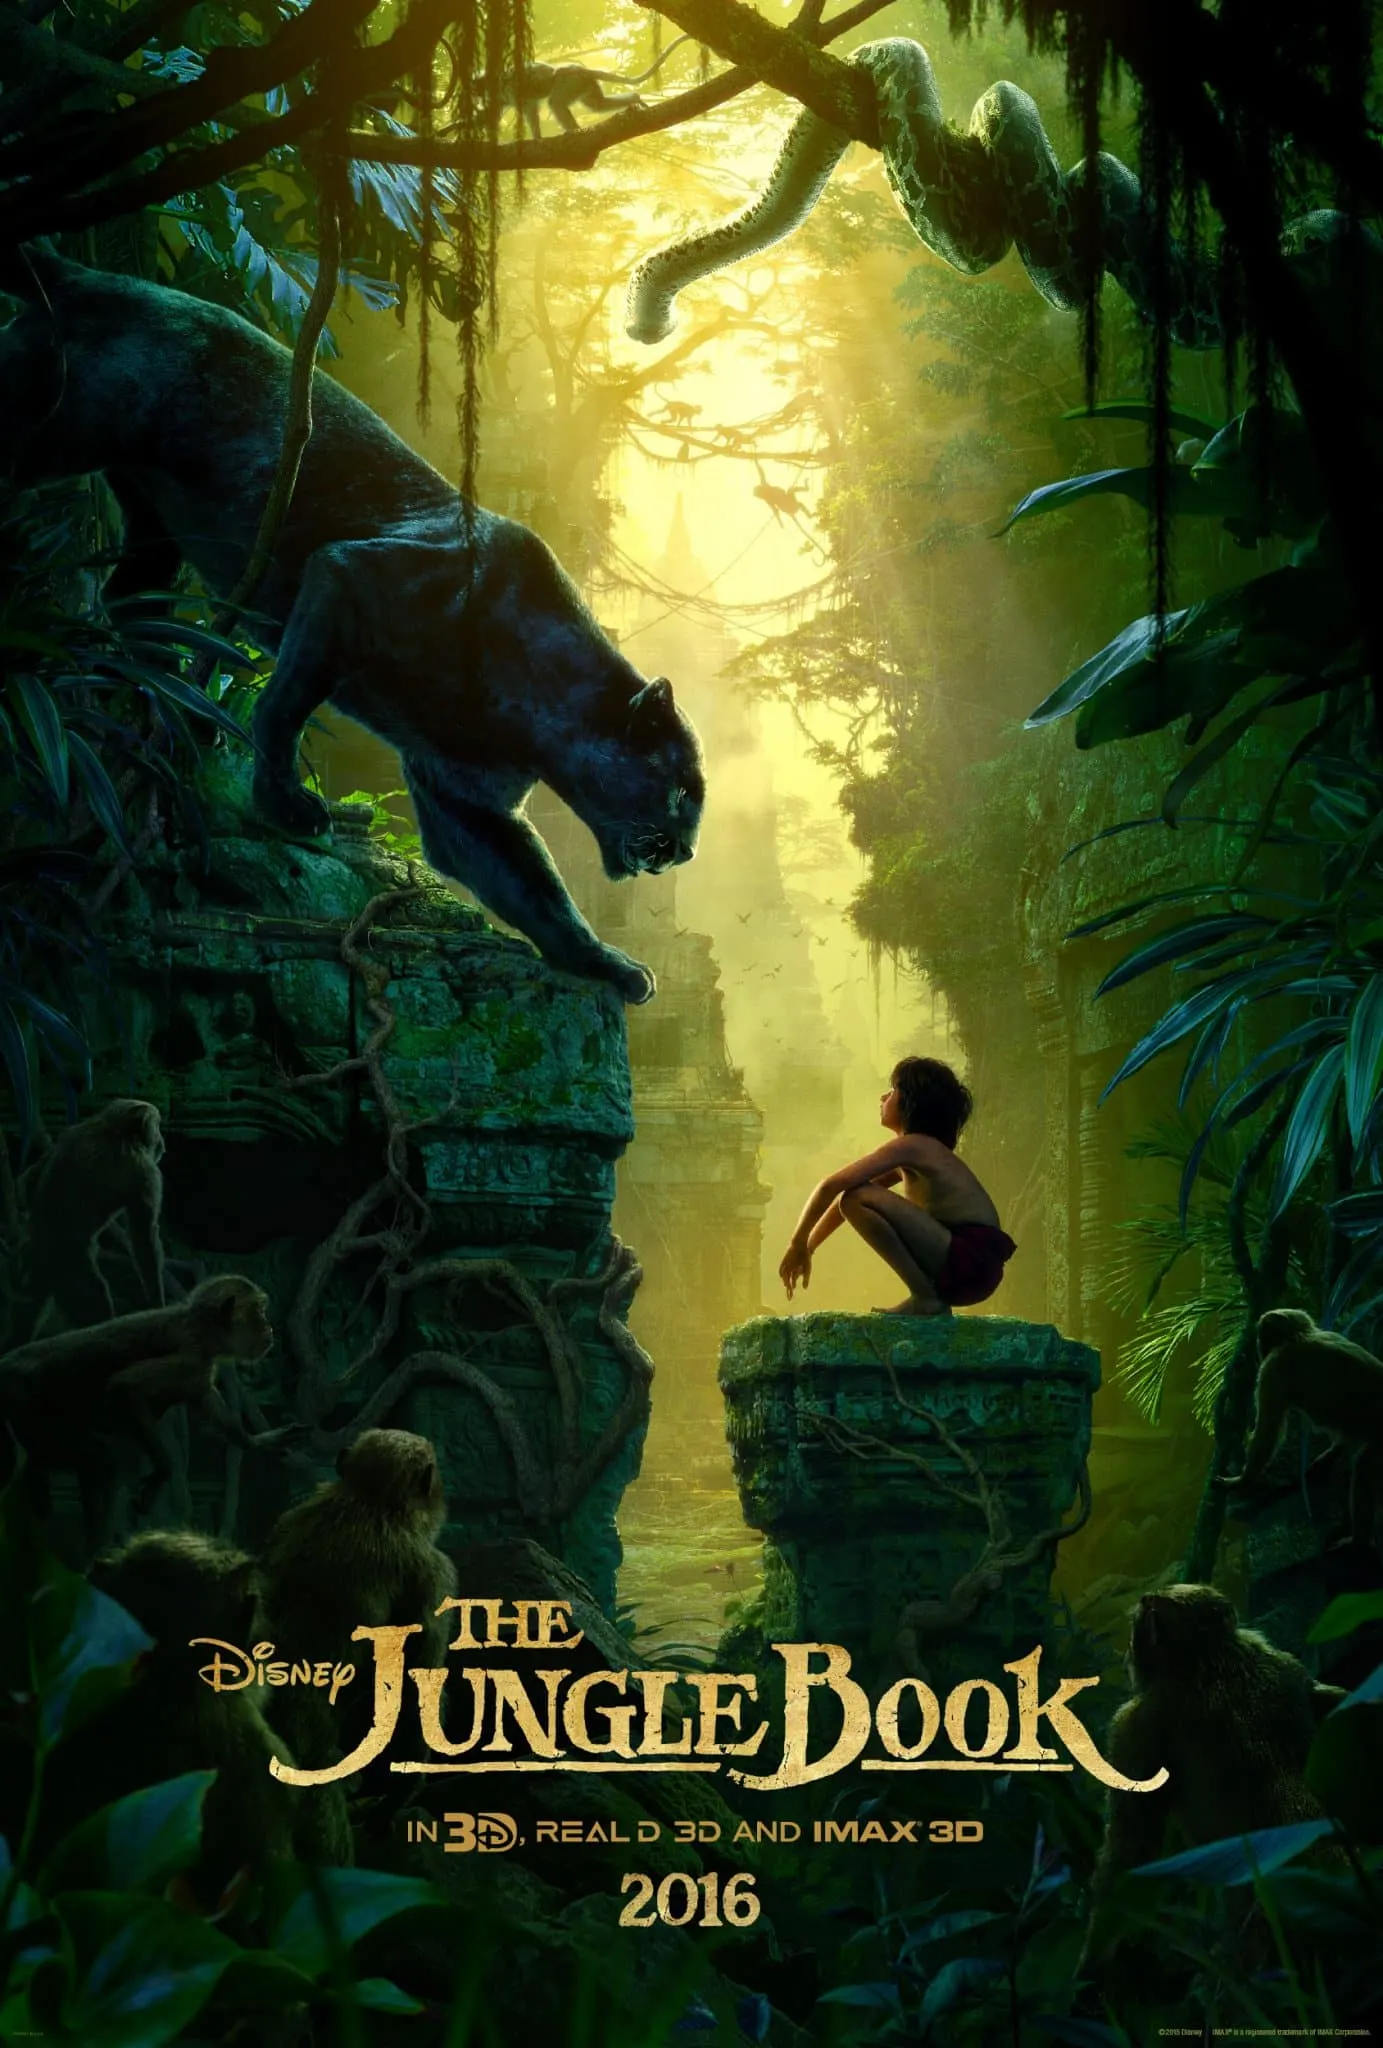 THE JUNGLE BOOK ? WILD WORLD ? Man-cub Mowgli (voice of Neel Sethi), who's been raised by a family of wolves, embarks on a journey of self-discovery, guided by a panther-turned-mentor Bagheera. Directed by Jon Favreau (?Iron Man?), based on Rudyard Kipling?s timeless stories and featuring state-of the-art technology that immerses audiences in the lush world like never before, Disney?s ?The Jungle Book? hits theaters in stunning 3D and IMAX 3D on April 15, 2016. ?2015 Disney Enterprises, Inc. All Rights Reserved.